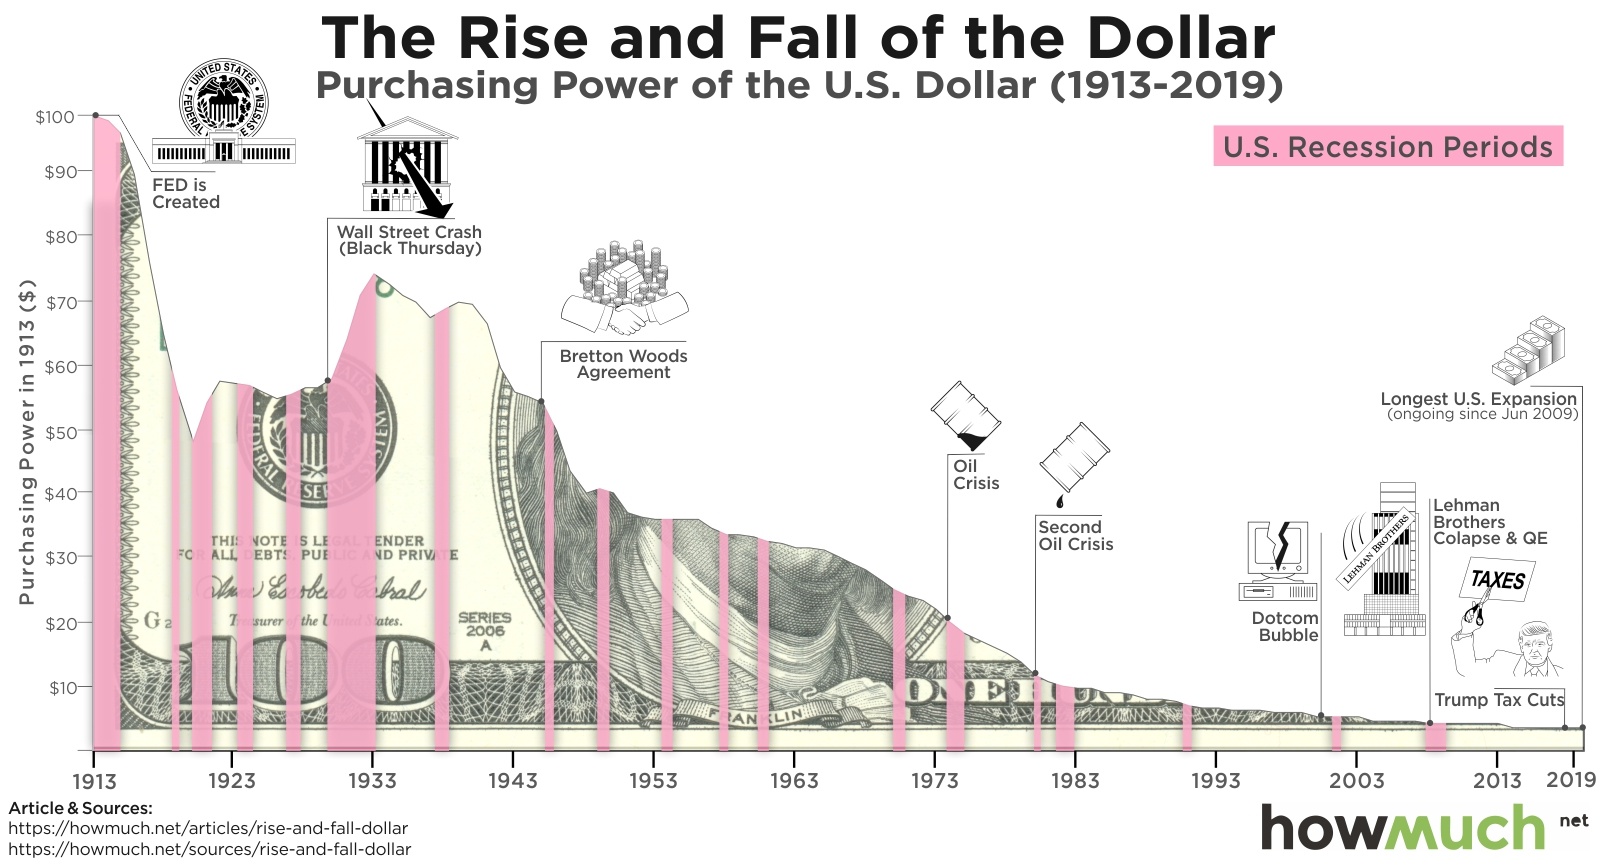 In Brief The Decline of the US Dollar Since the Founding of the Fed